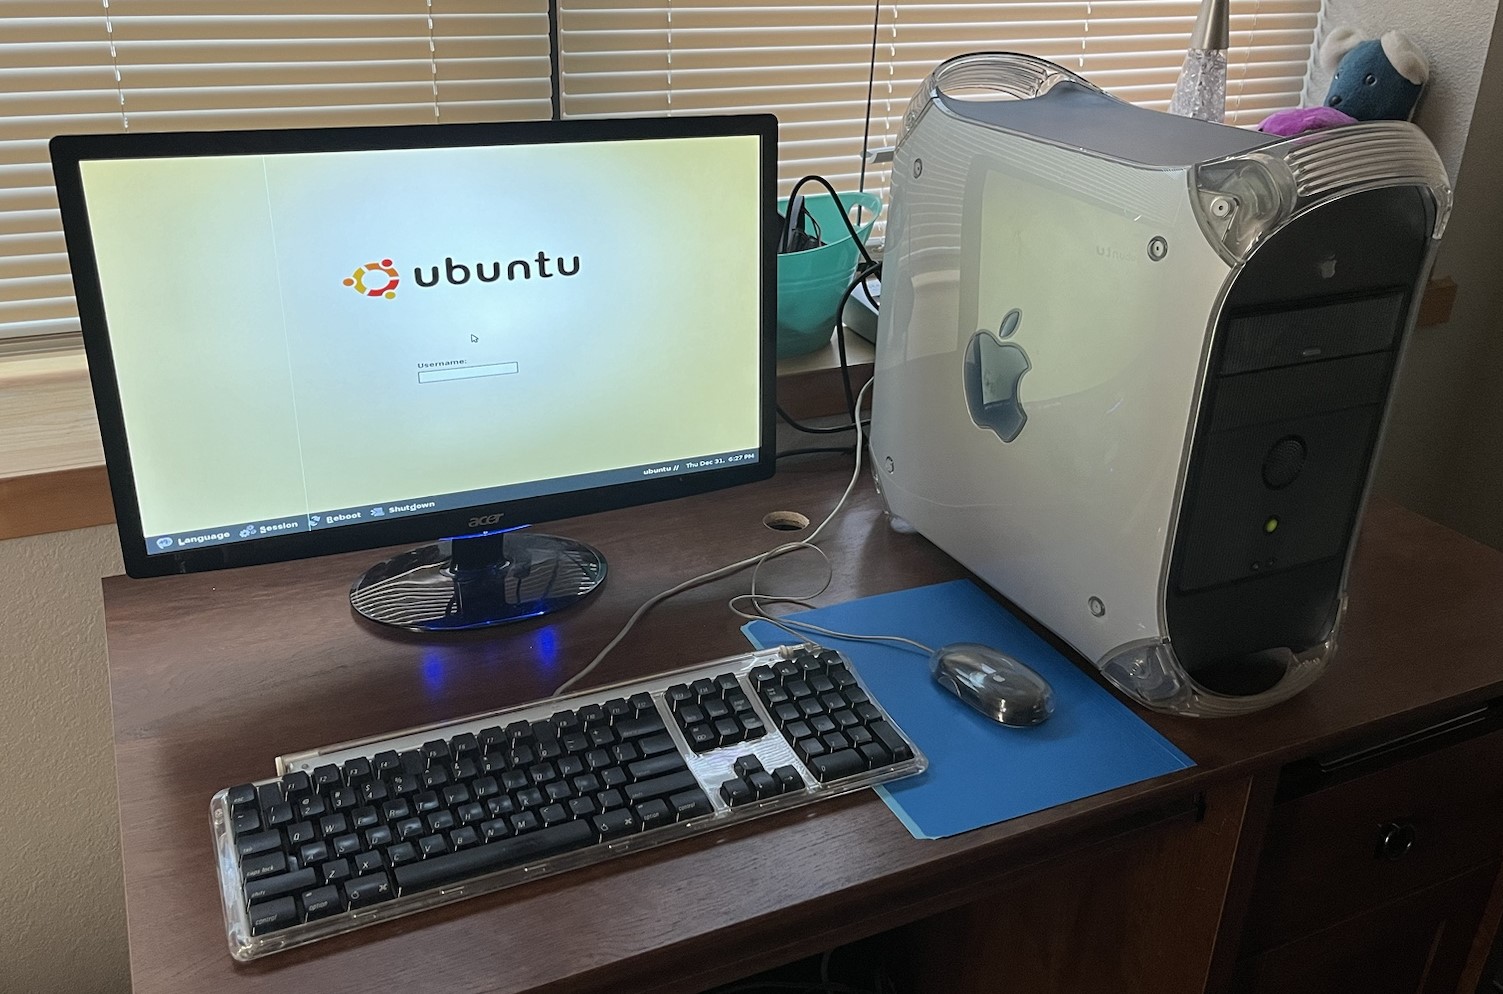 A Power Mac G4, Apple keyboard and mouse, and Acer LCD monitor sit atop a simple desk. The Power Mac G4 is powered on. Ubuntu 4.10’s login screen is shown on the monitor.